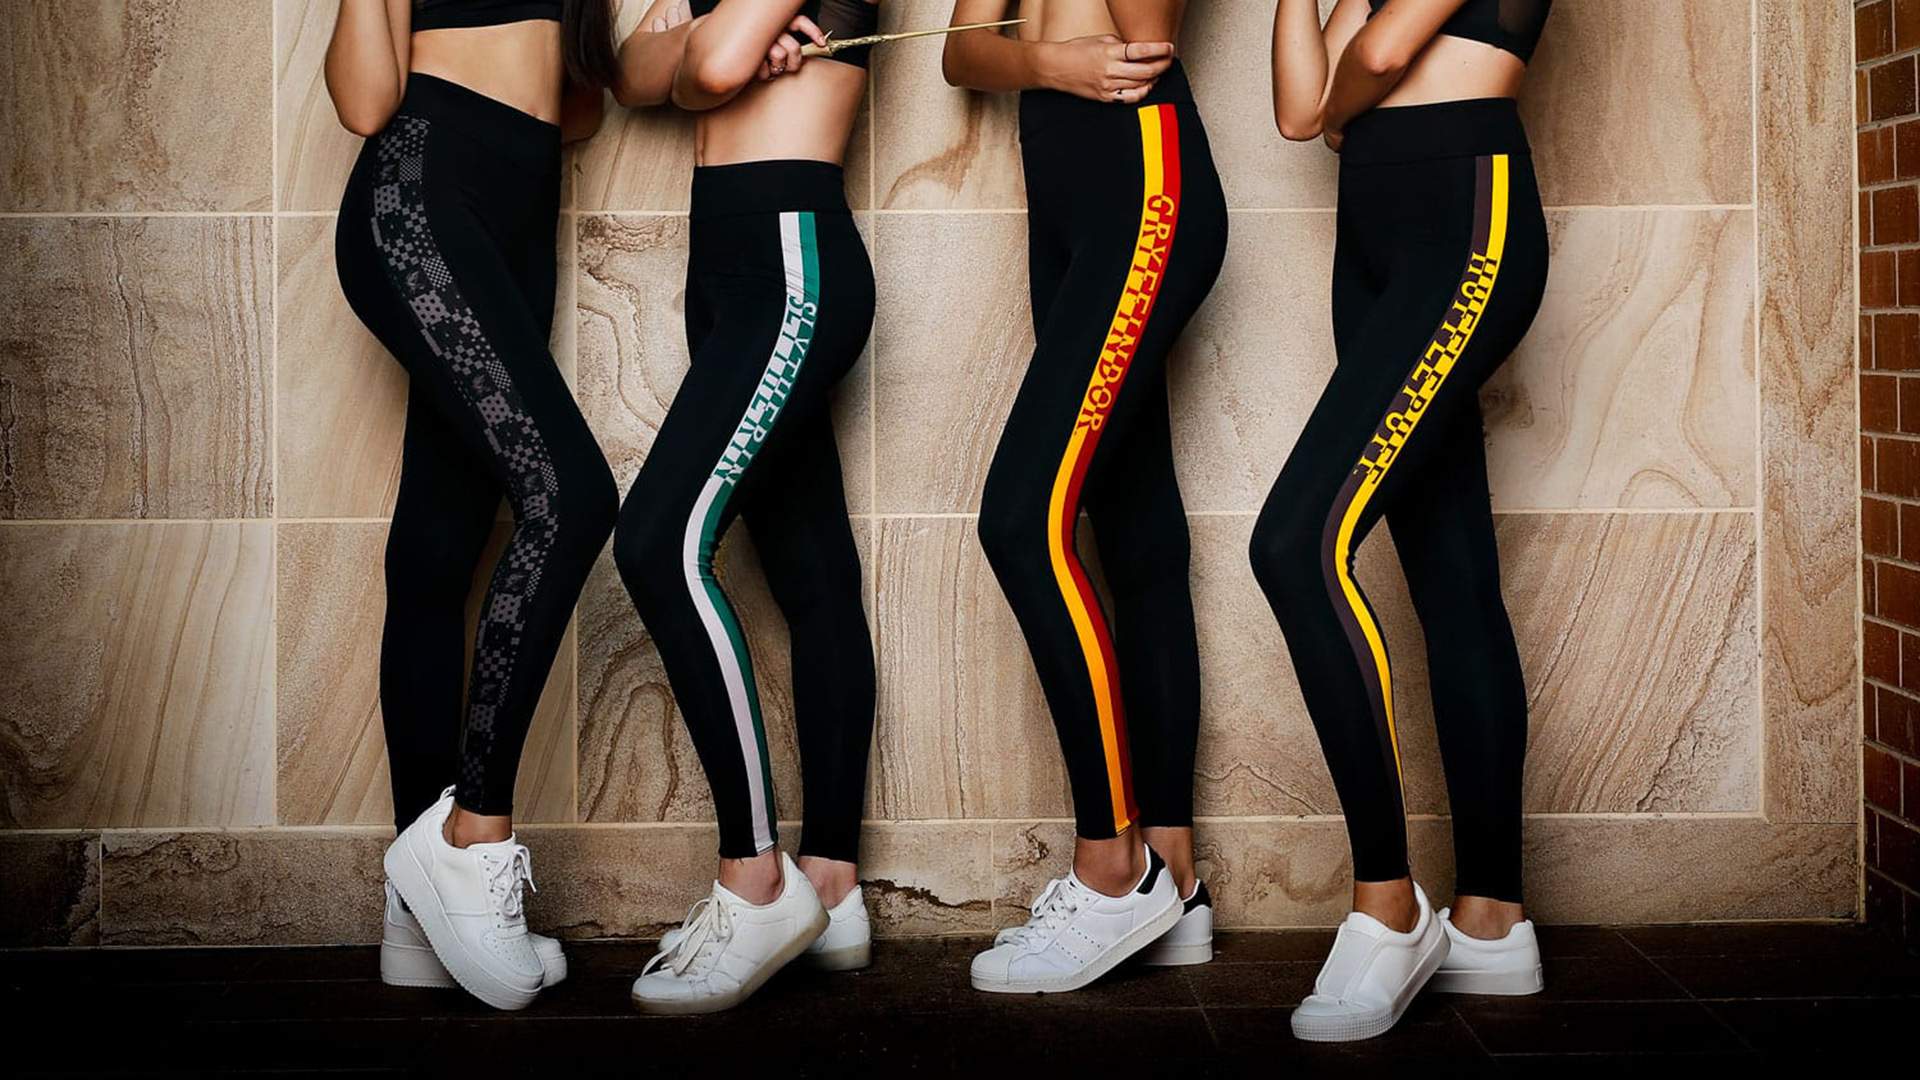 Harry Potter Activewear Is the Magical Gym Inspiration We All Need